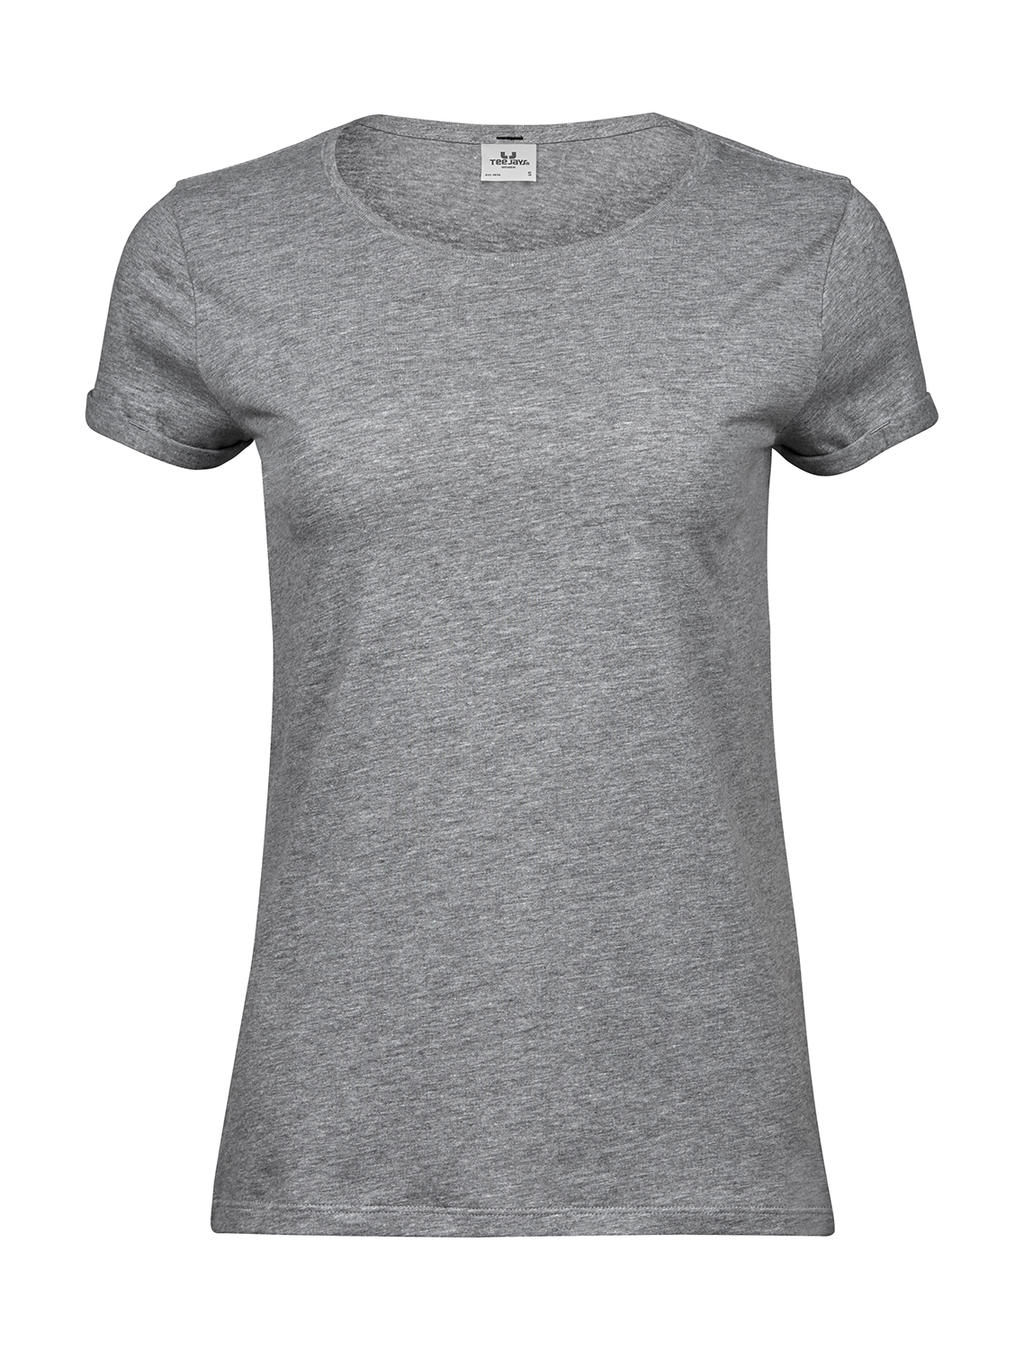  Ladies Roll-Up Tee in Farbe Heather Grey